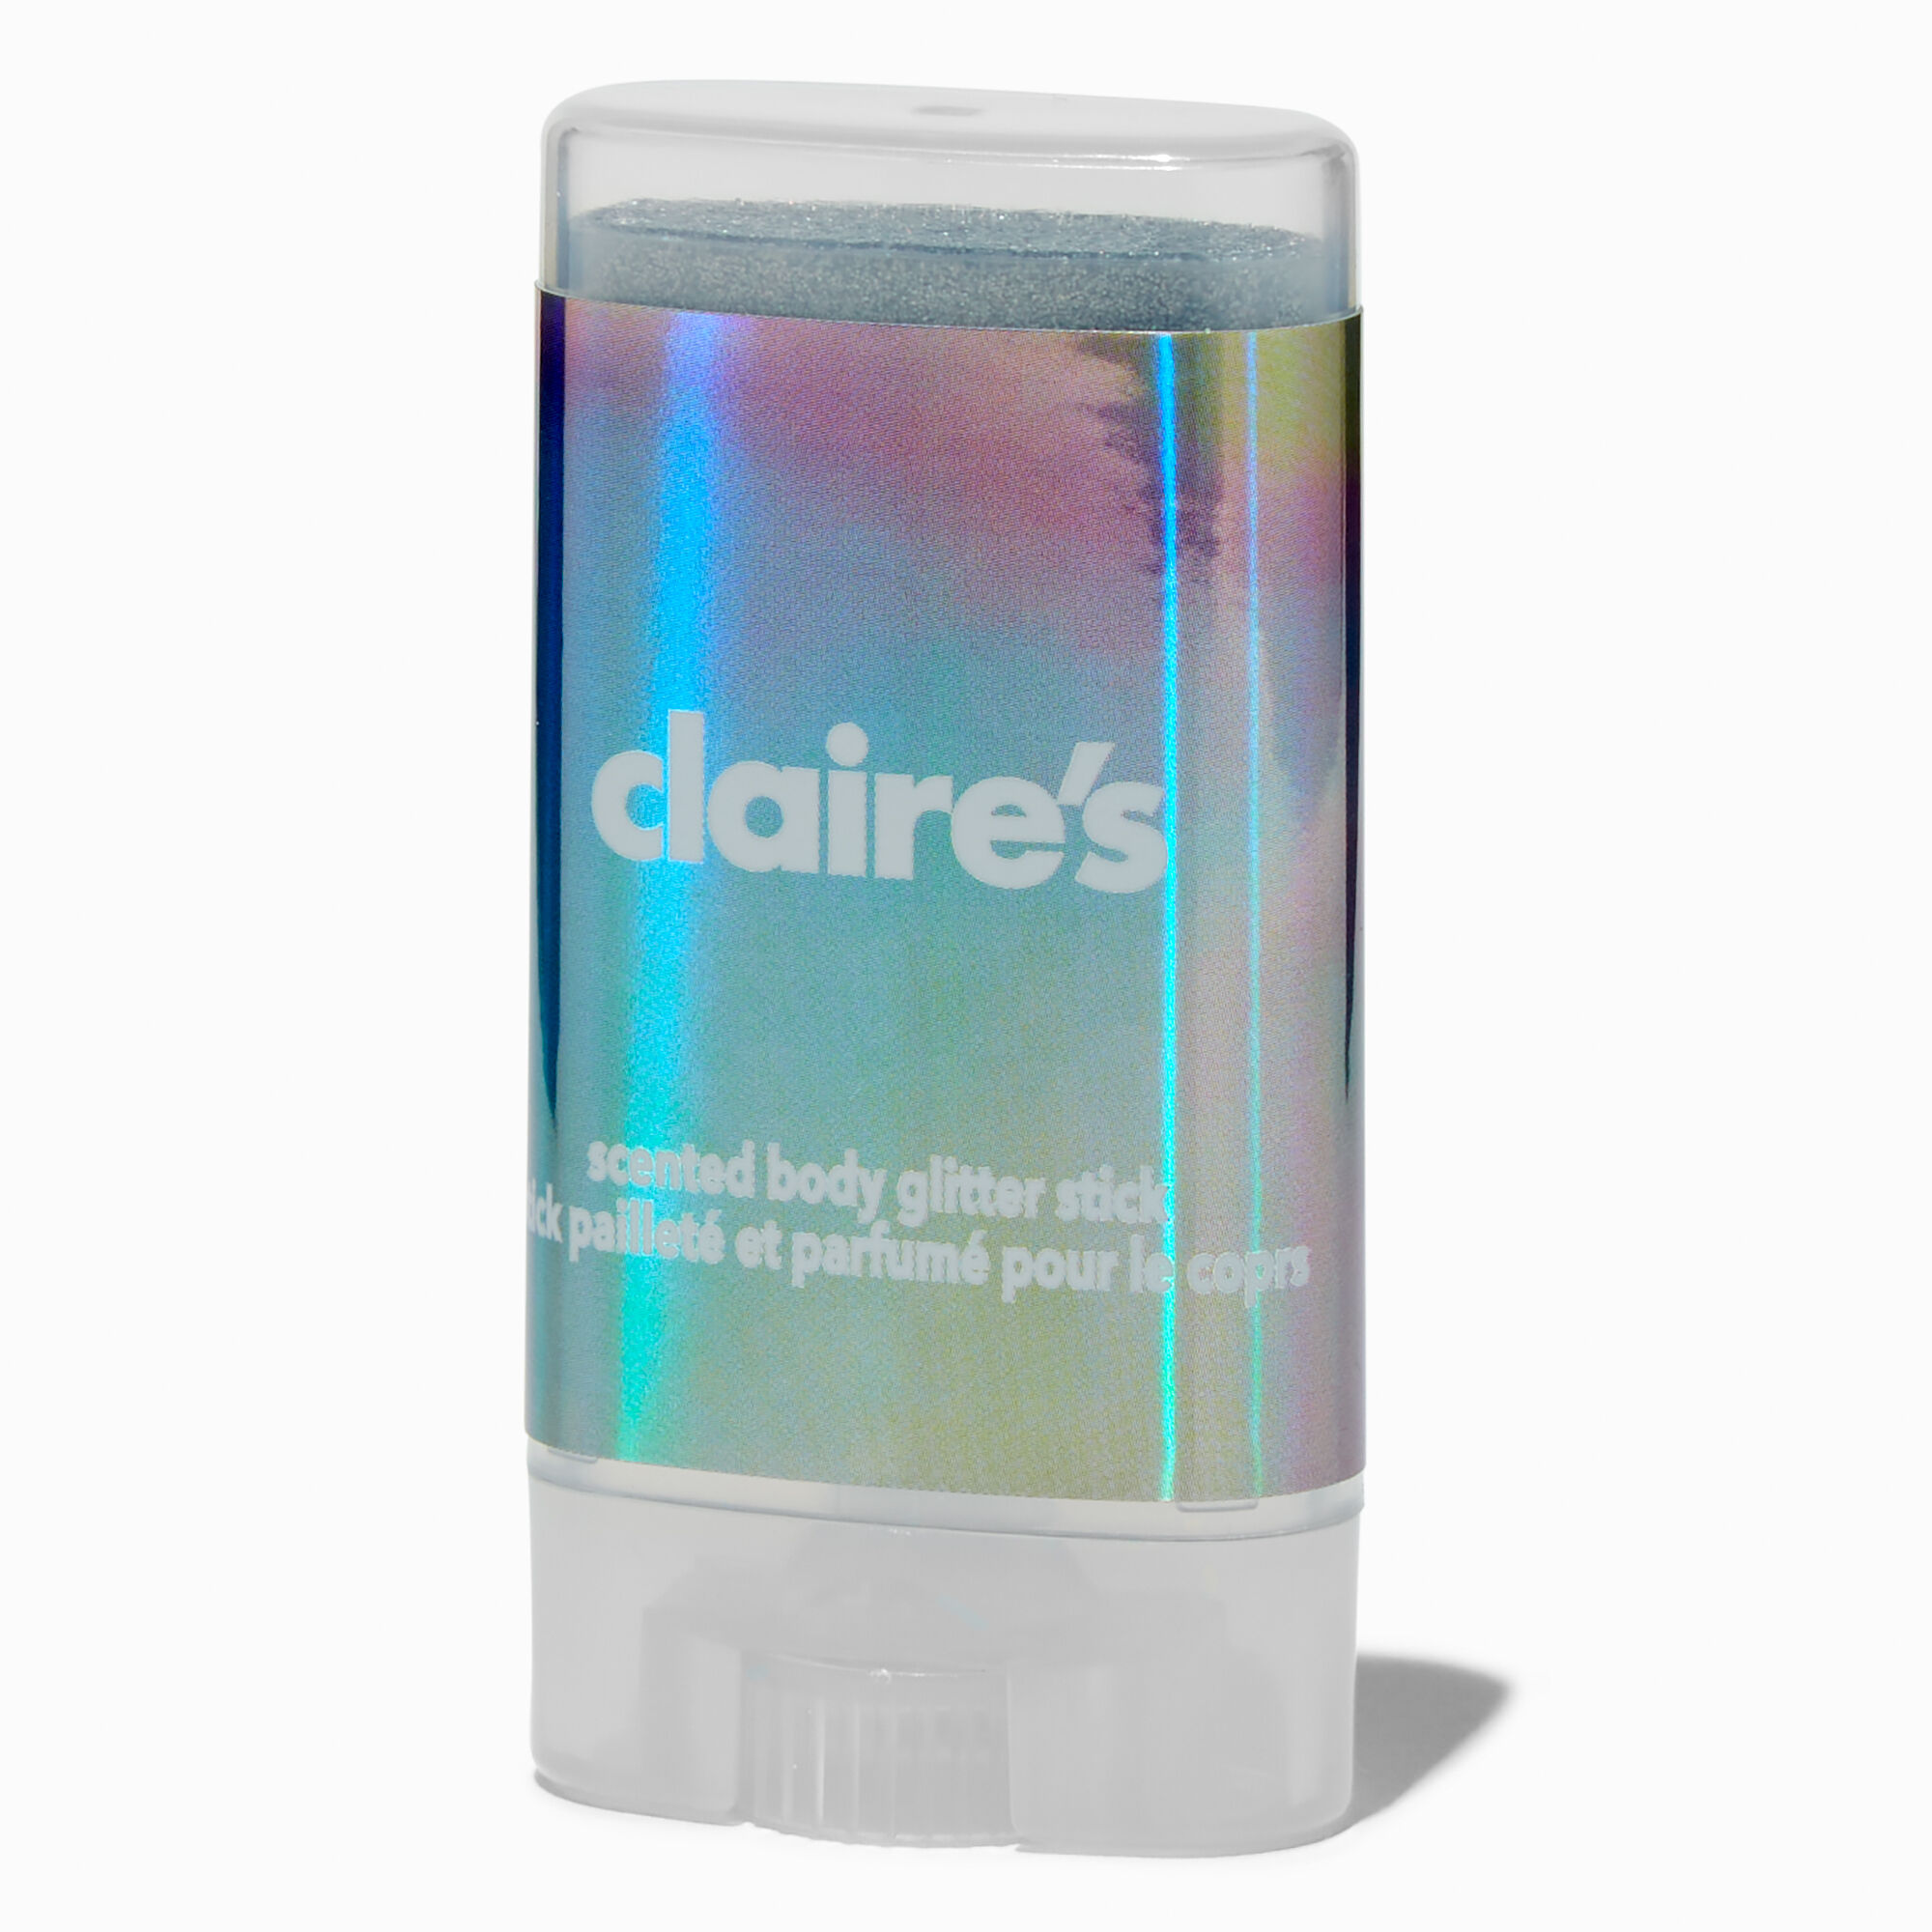 View Claires Holographic Scented Body Glitter Stick information